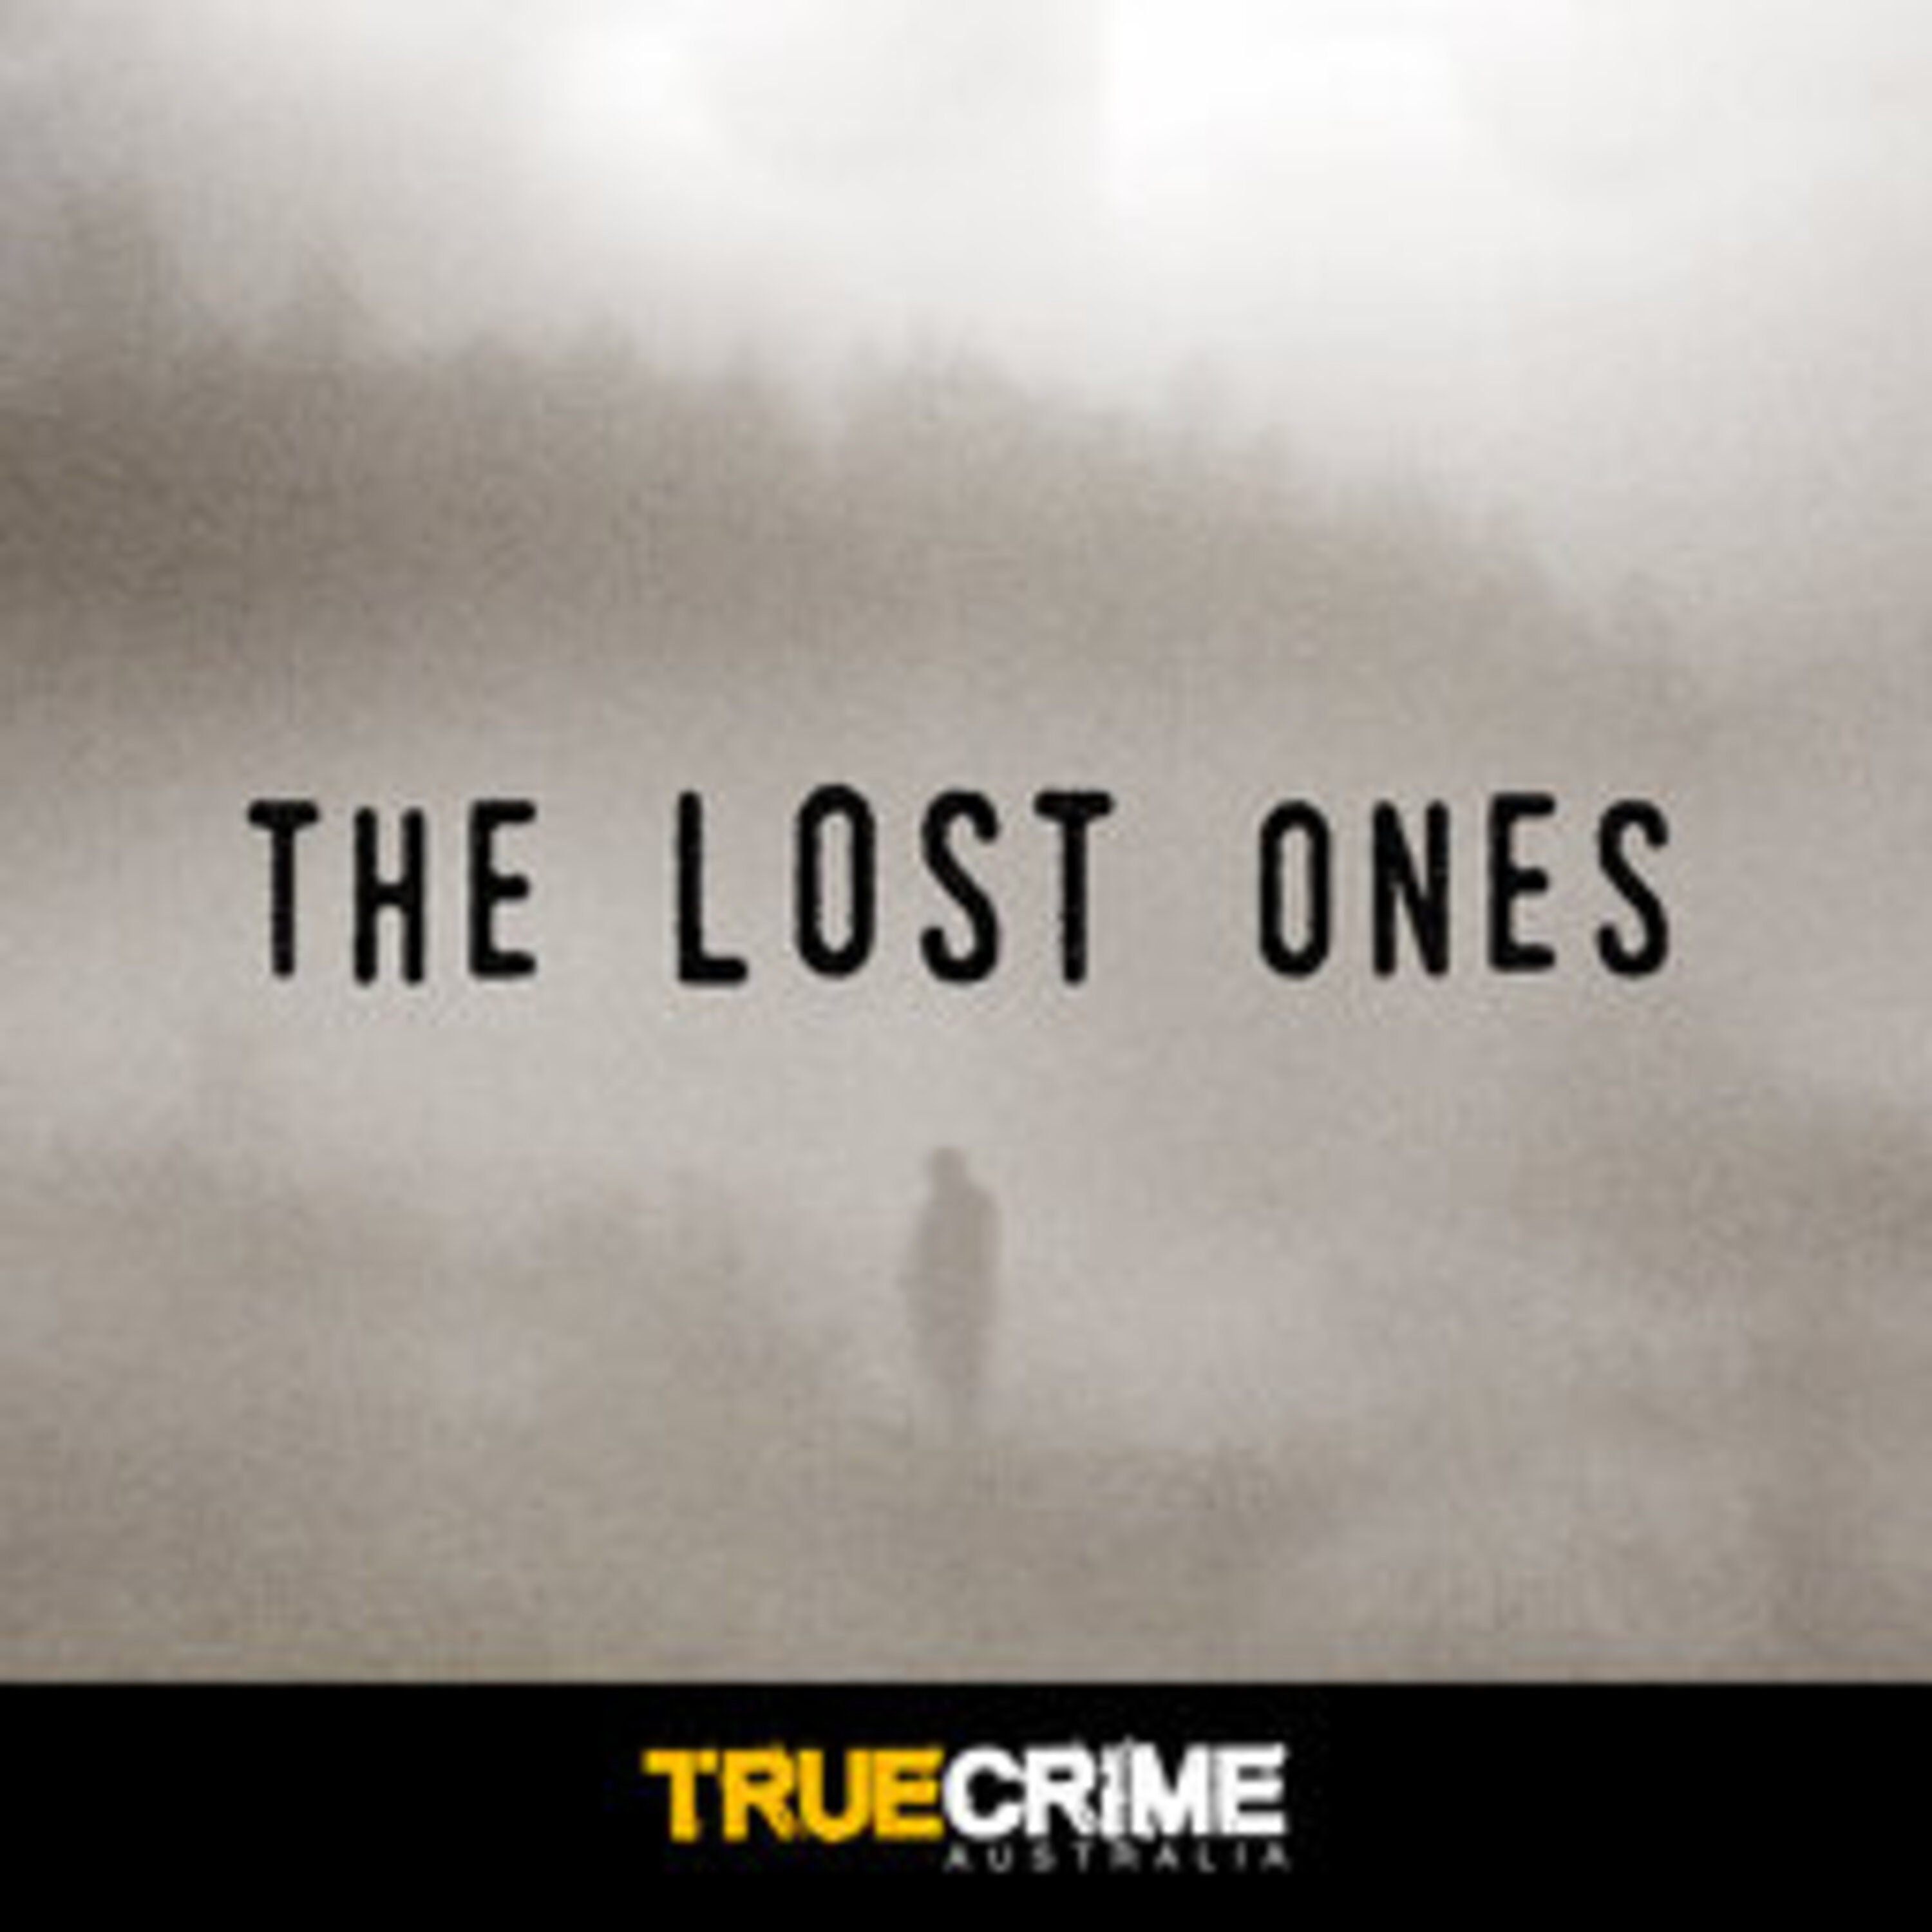 Introducing - The Lost Ones